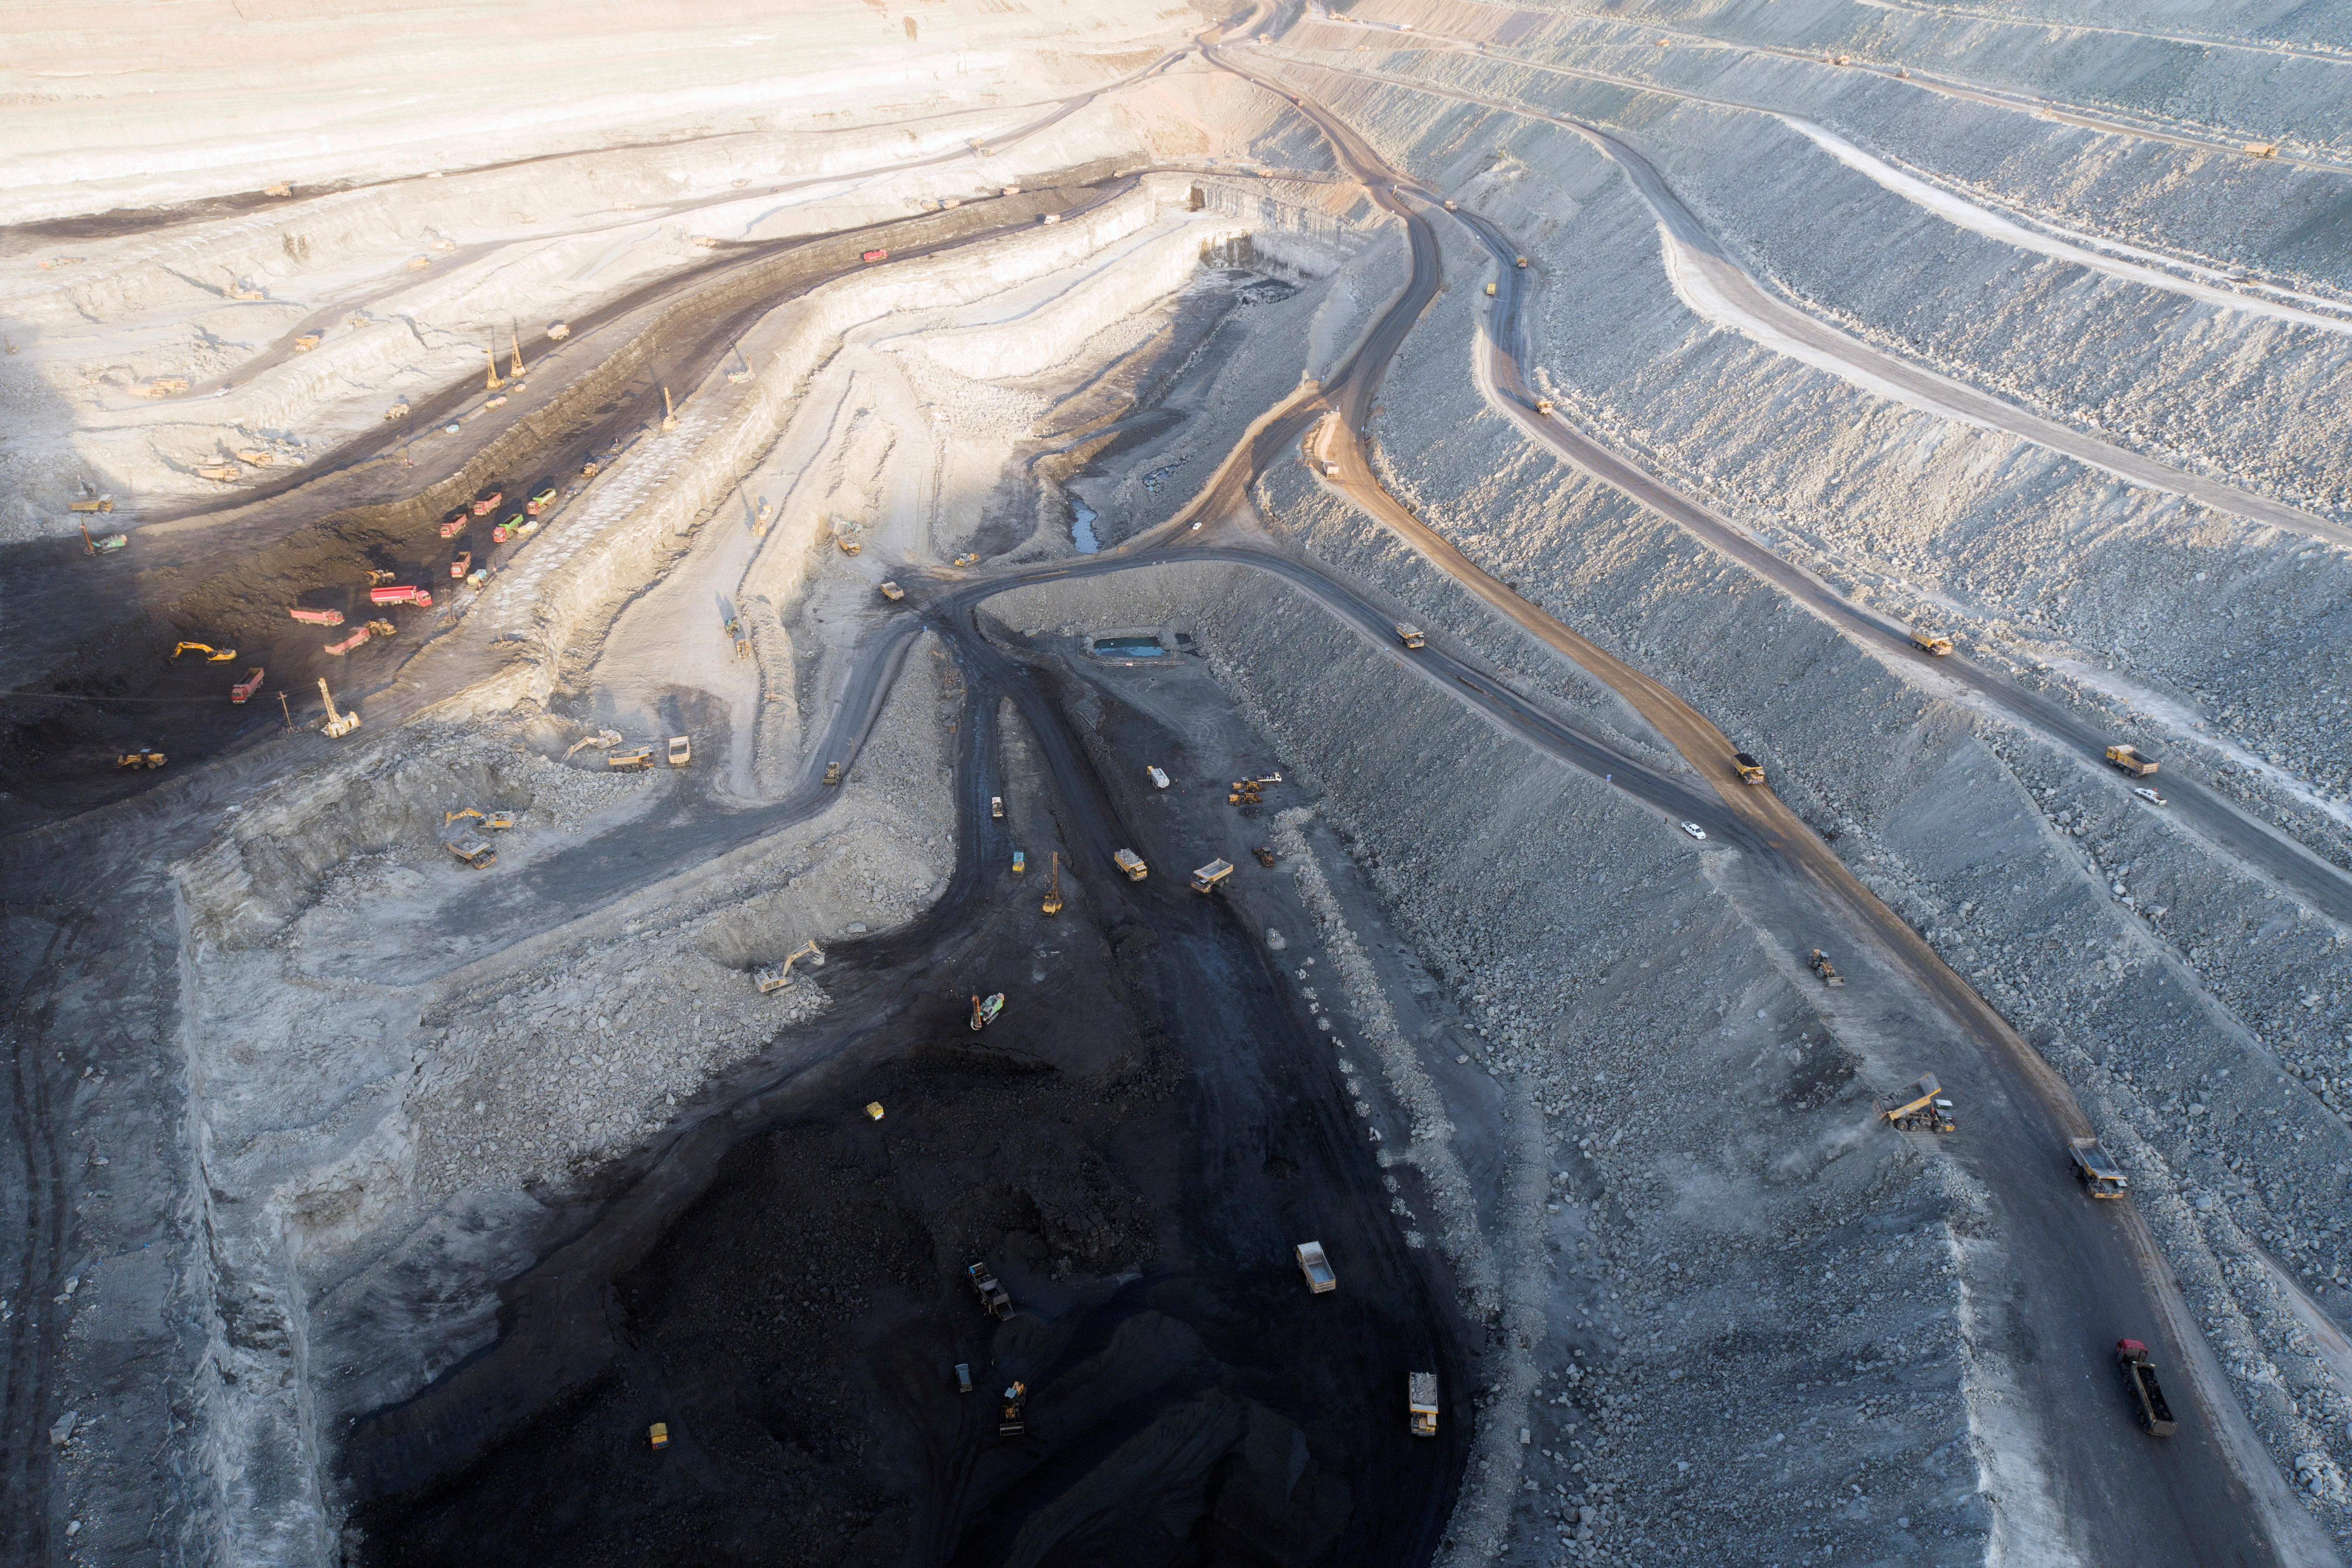 Aerial view shows machinery working in an open-pit coal mine in Ejin Horo Banner